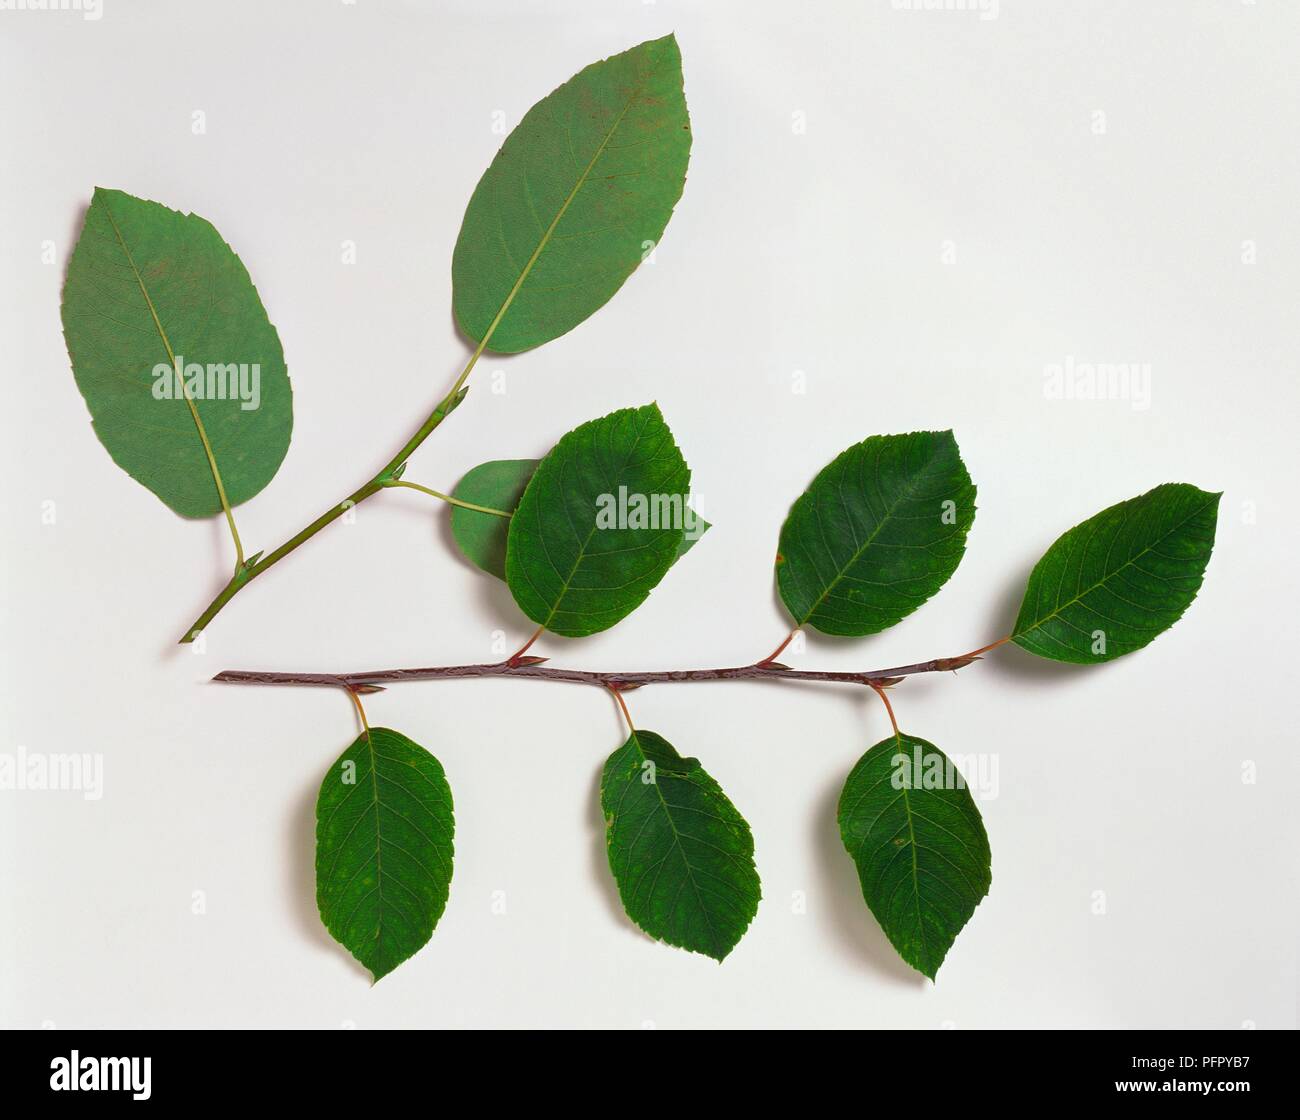 Amelanchier arborea (Downy serviceberry), branch or stem tip bearing alternative leaves, also showing small buds in leaf axils Stock Photo